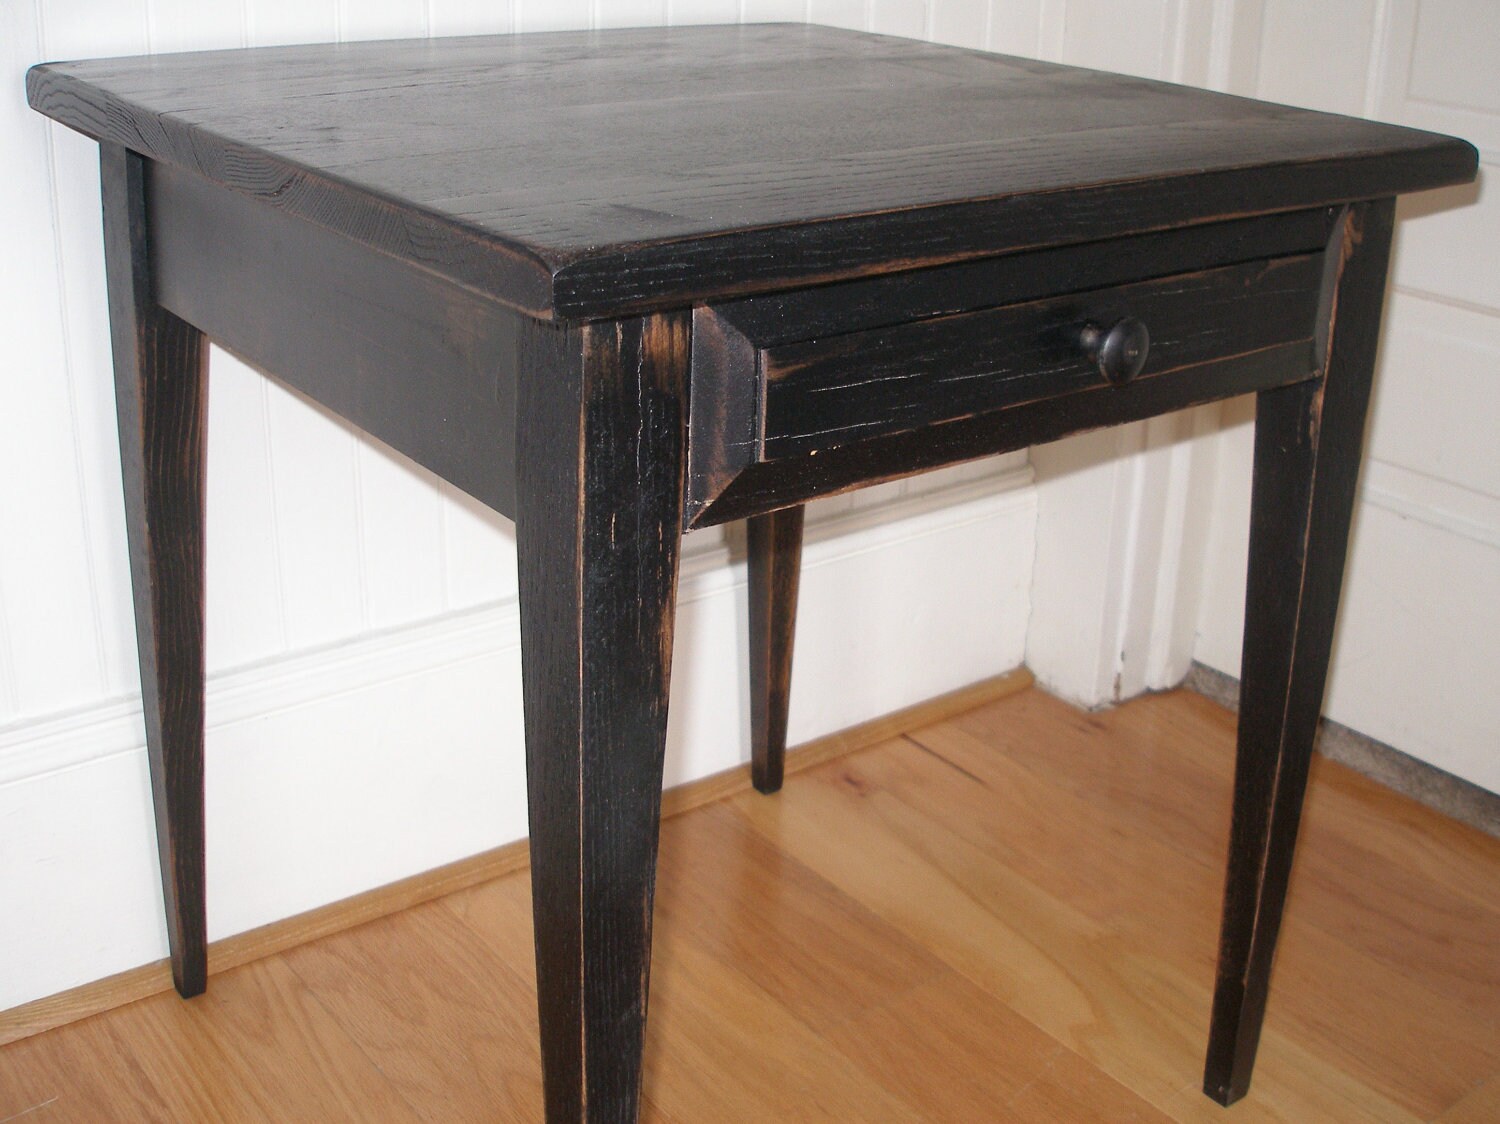 distressed rustic end tables